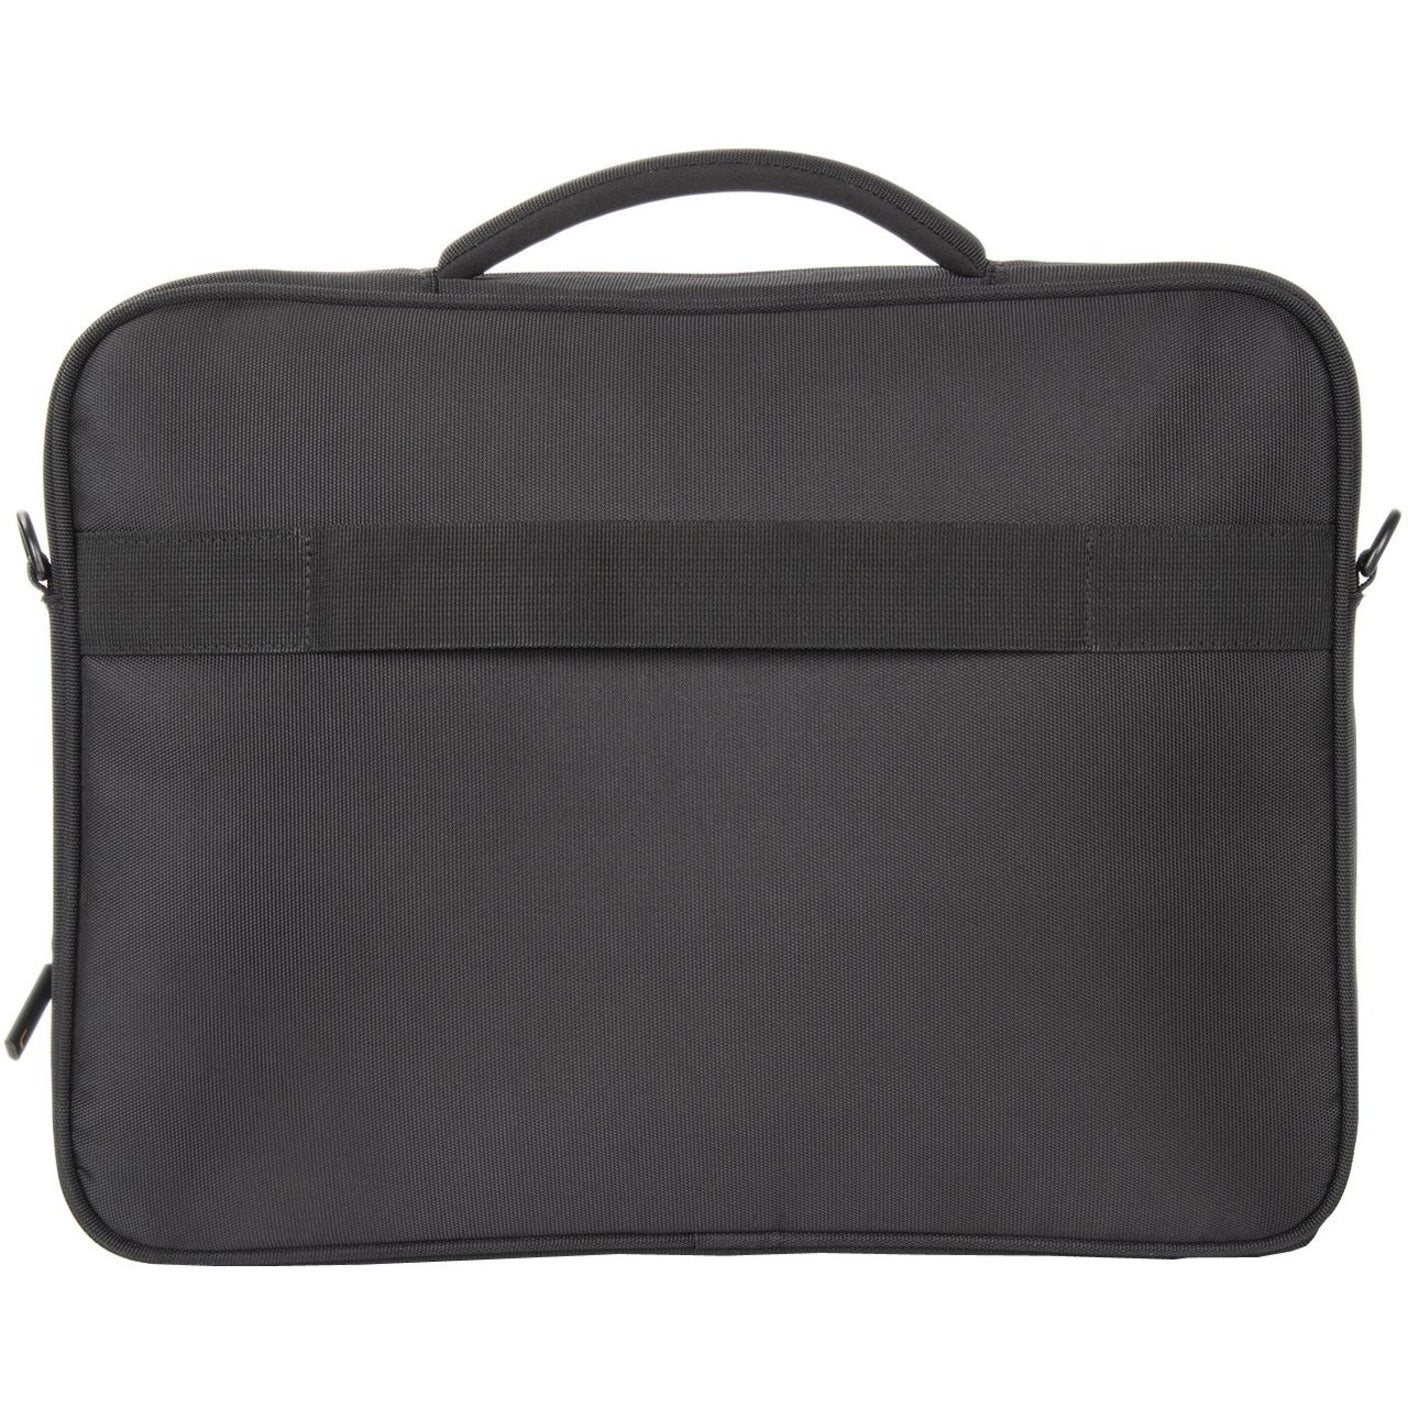 Rocstor Y1CC004-B1 Premium Universal Laptop Carrying Sleeve, Fits up to 16" Laptop, RFID Pocket, Water Resistant